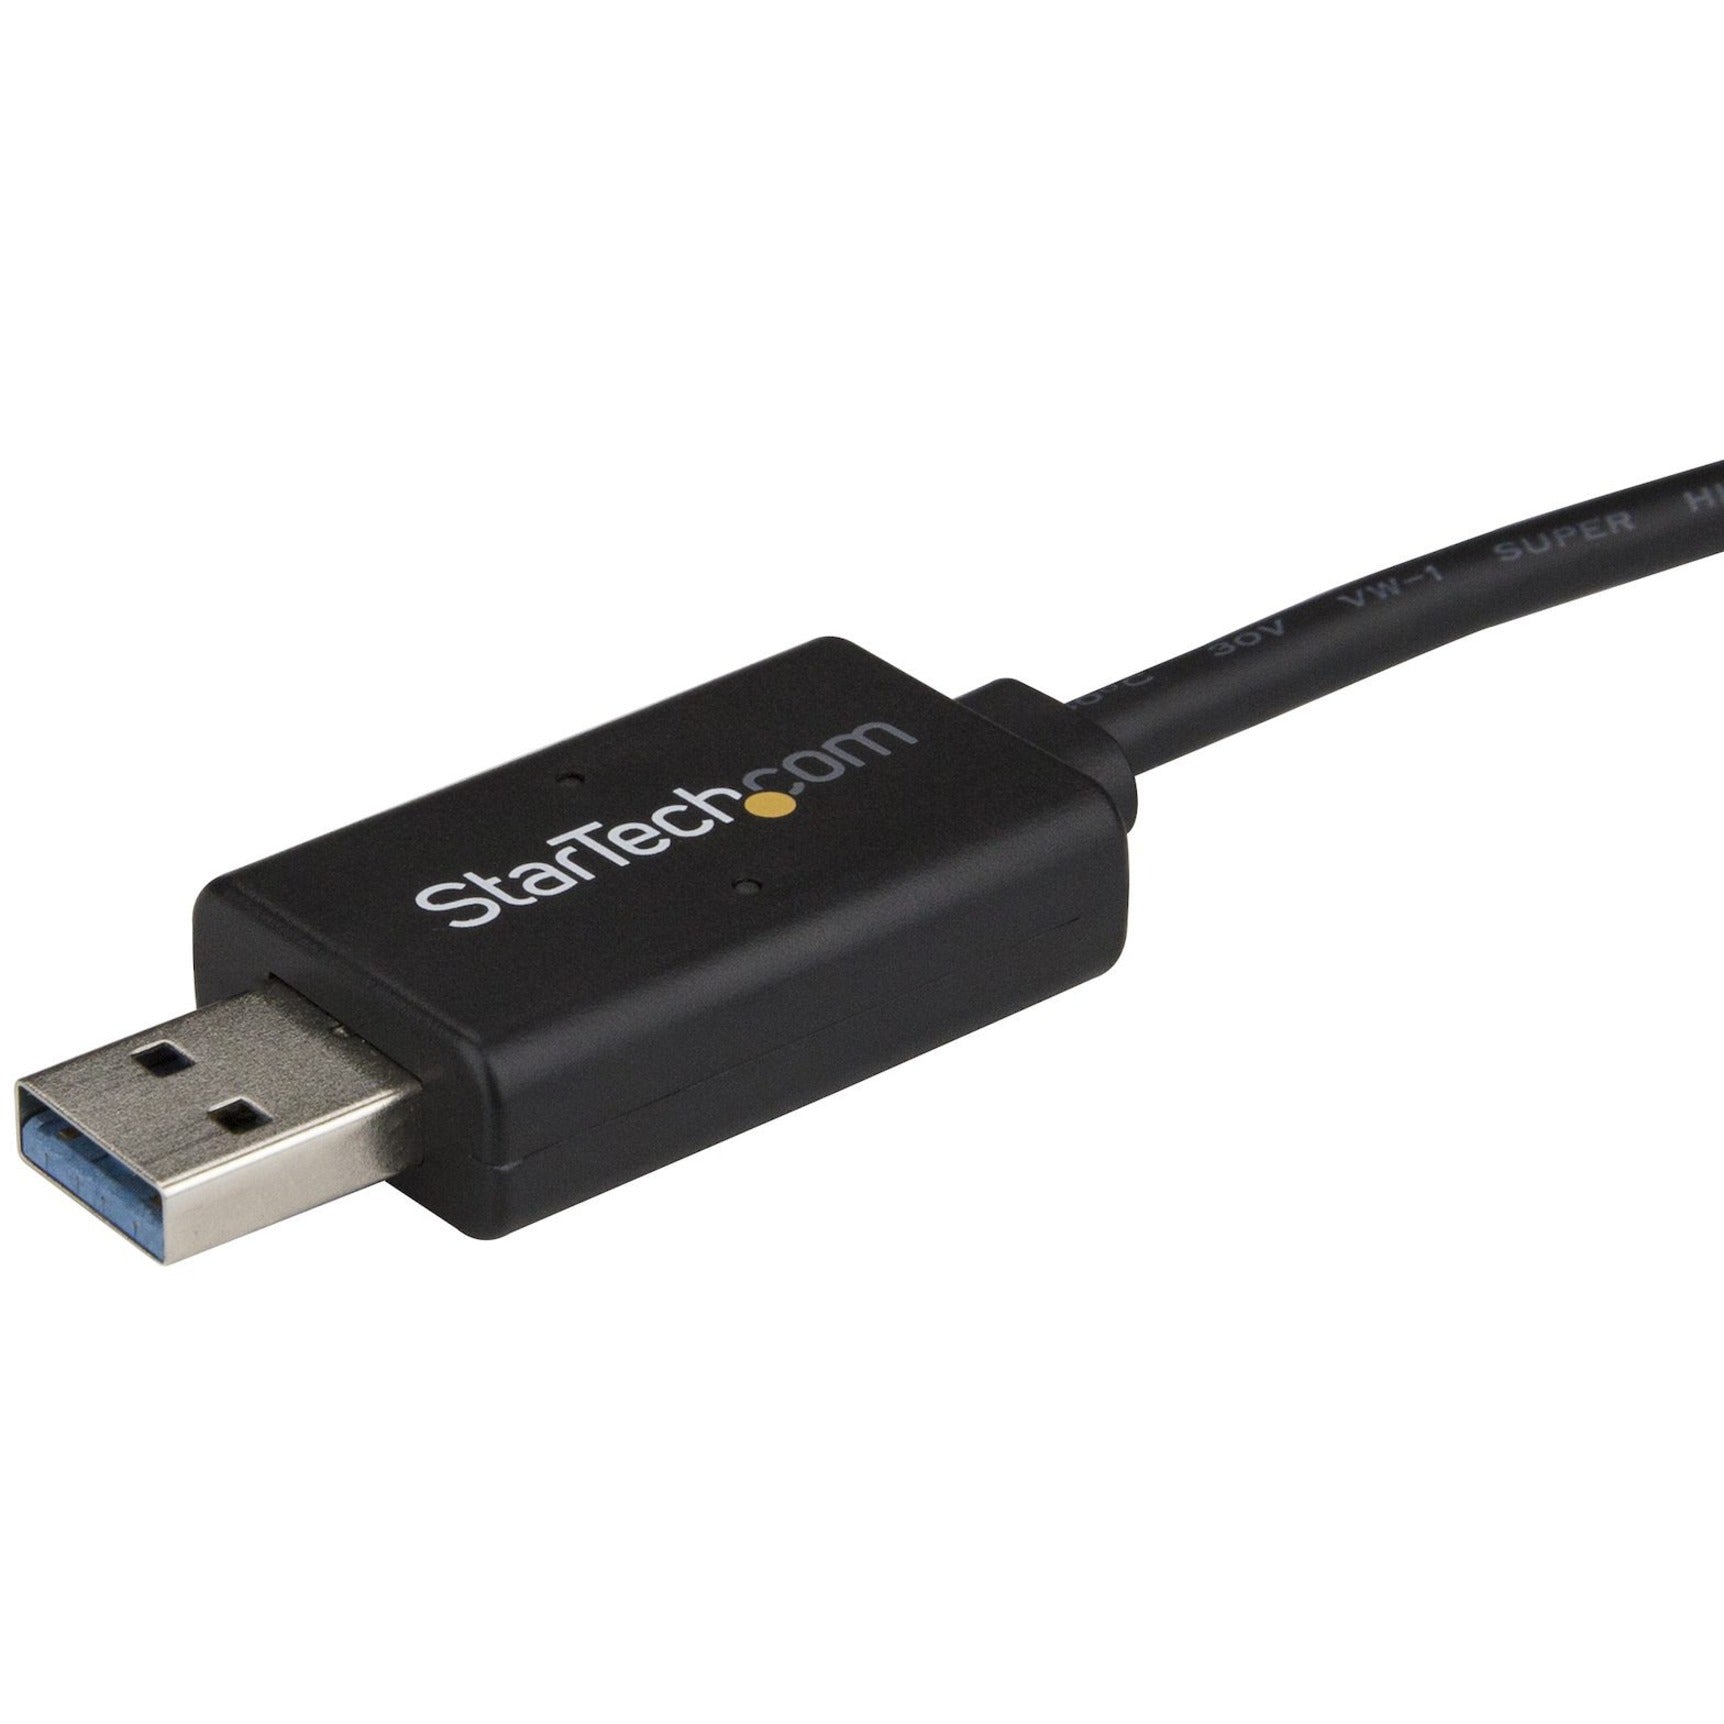 StarTech.com USBC3LINK USB-C to USB 3.0 Data Transfer Cable for Mac and Windows, 2m (6ft), Easy File Transfer